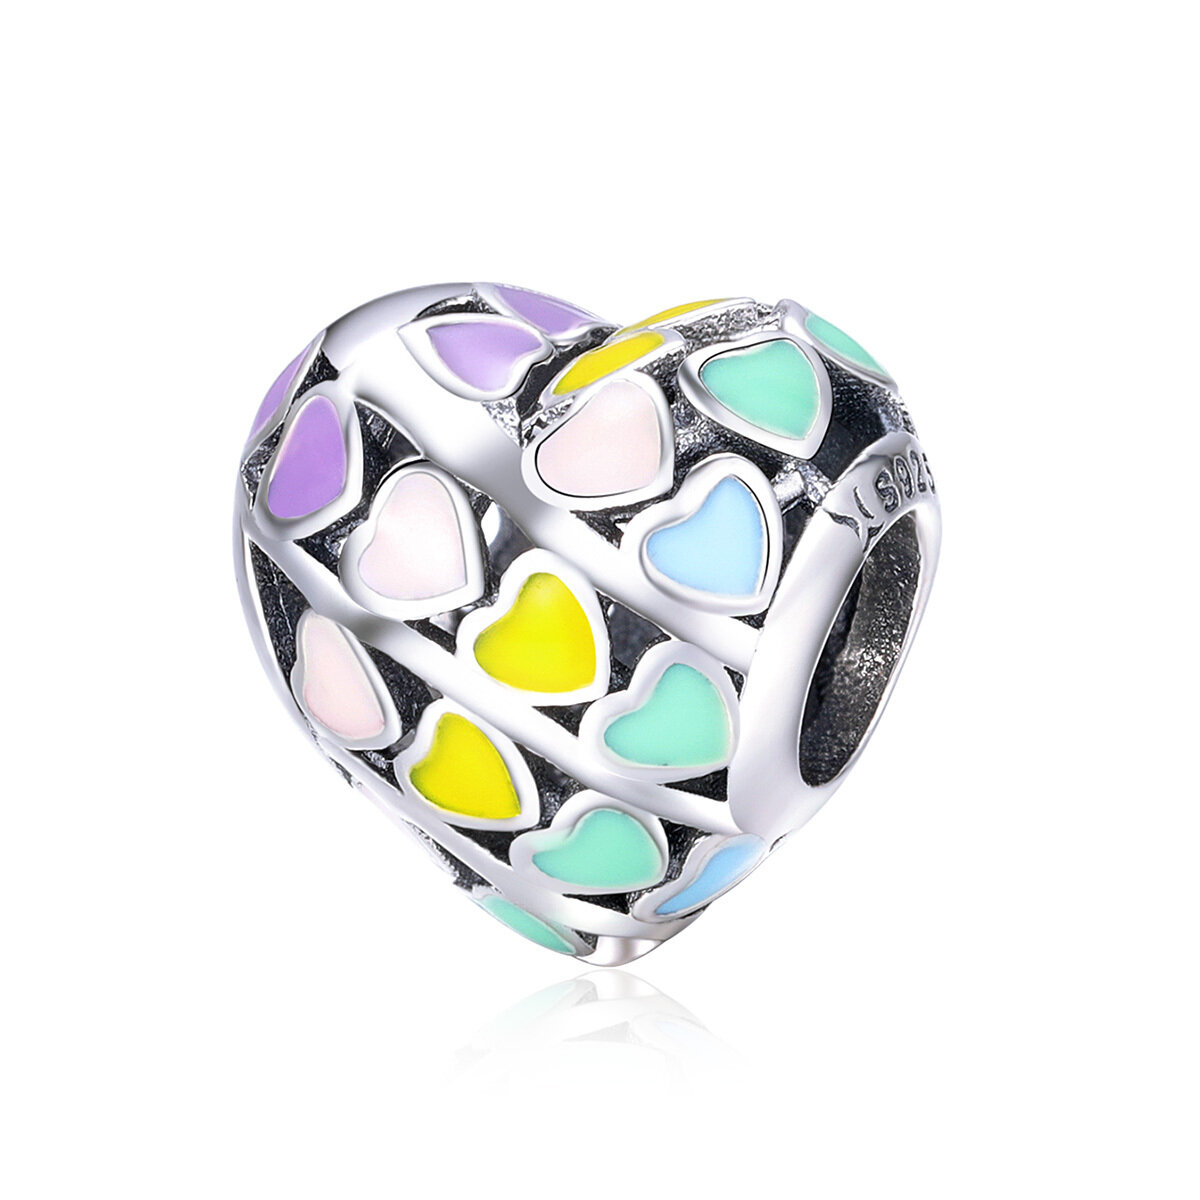 GemKing SCC902 Rainbow Heart  S925 Sterling Silver Charm